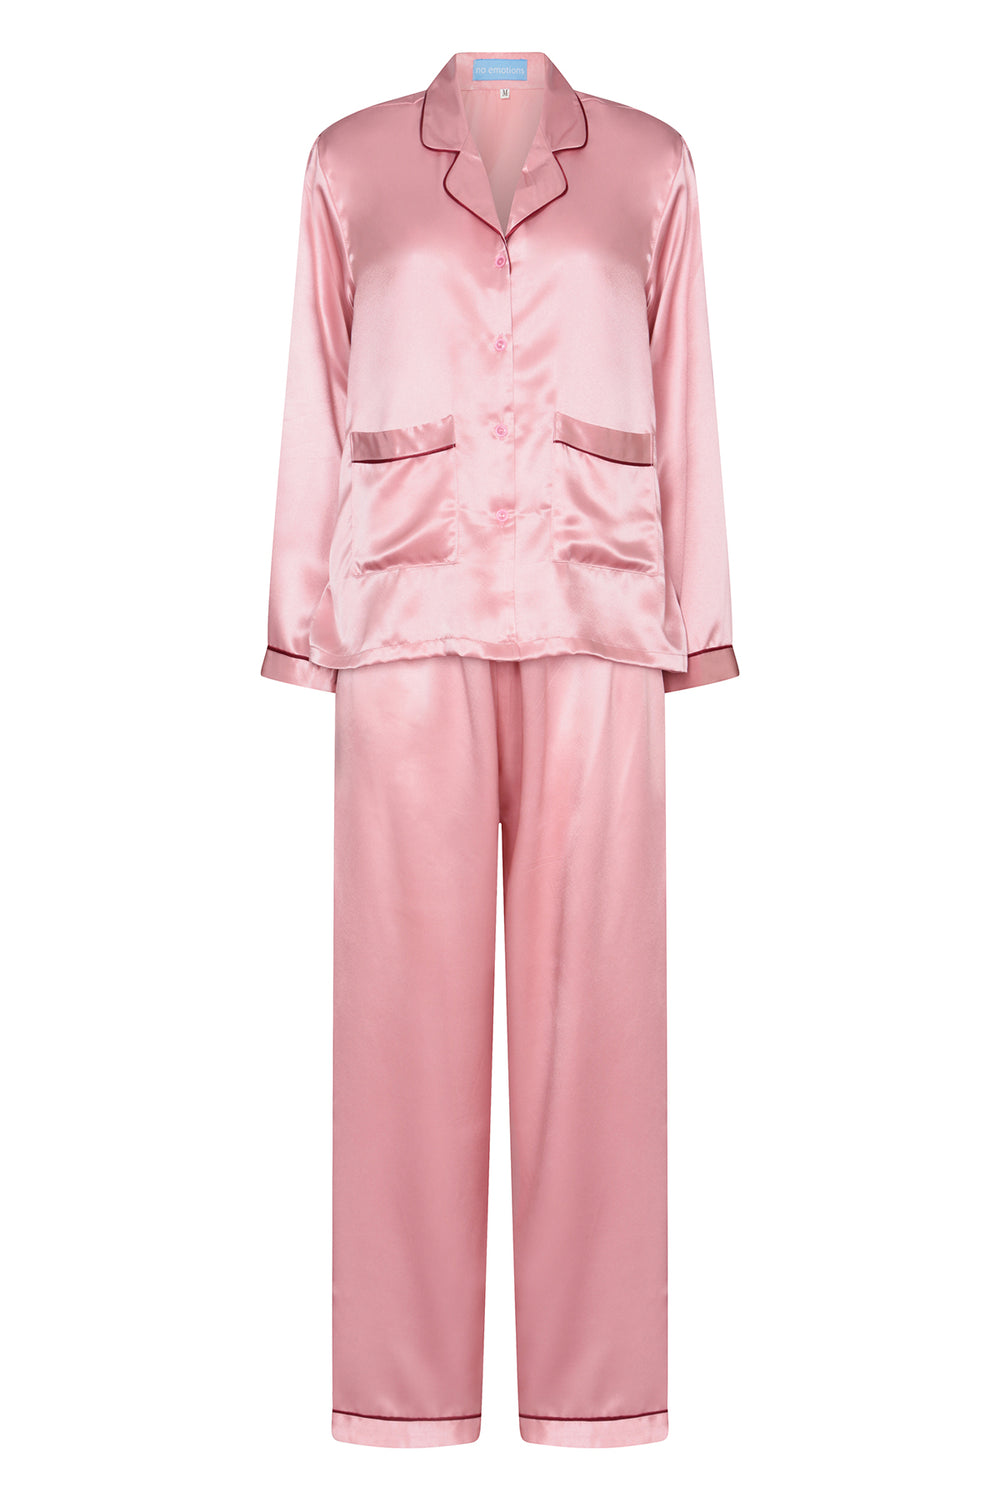 Pink silk matching pyjamas with red piping, worn in London